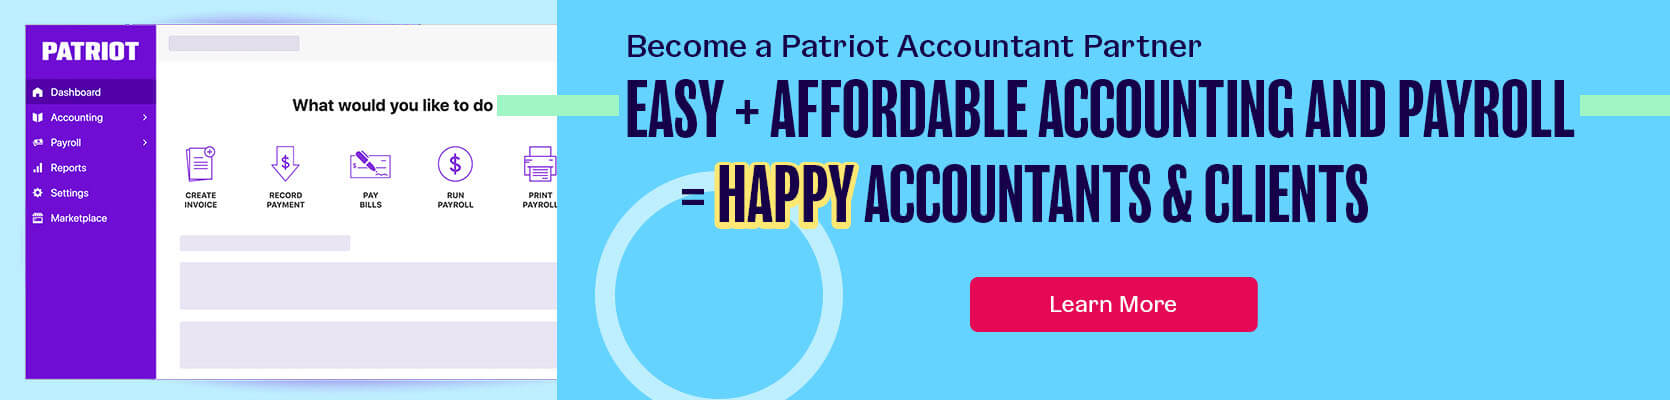 Patriot’s Accounting and Payroll Easy + Affordable = Happy Accountants & Clients Learn More